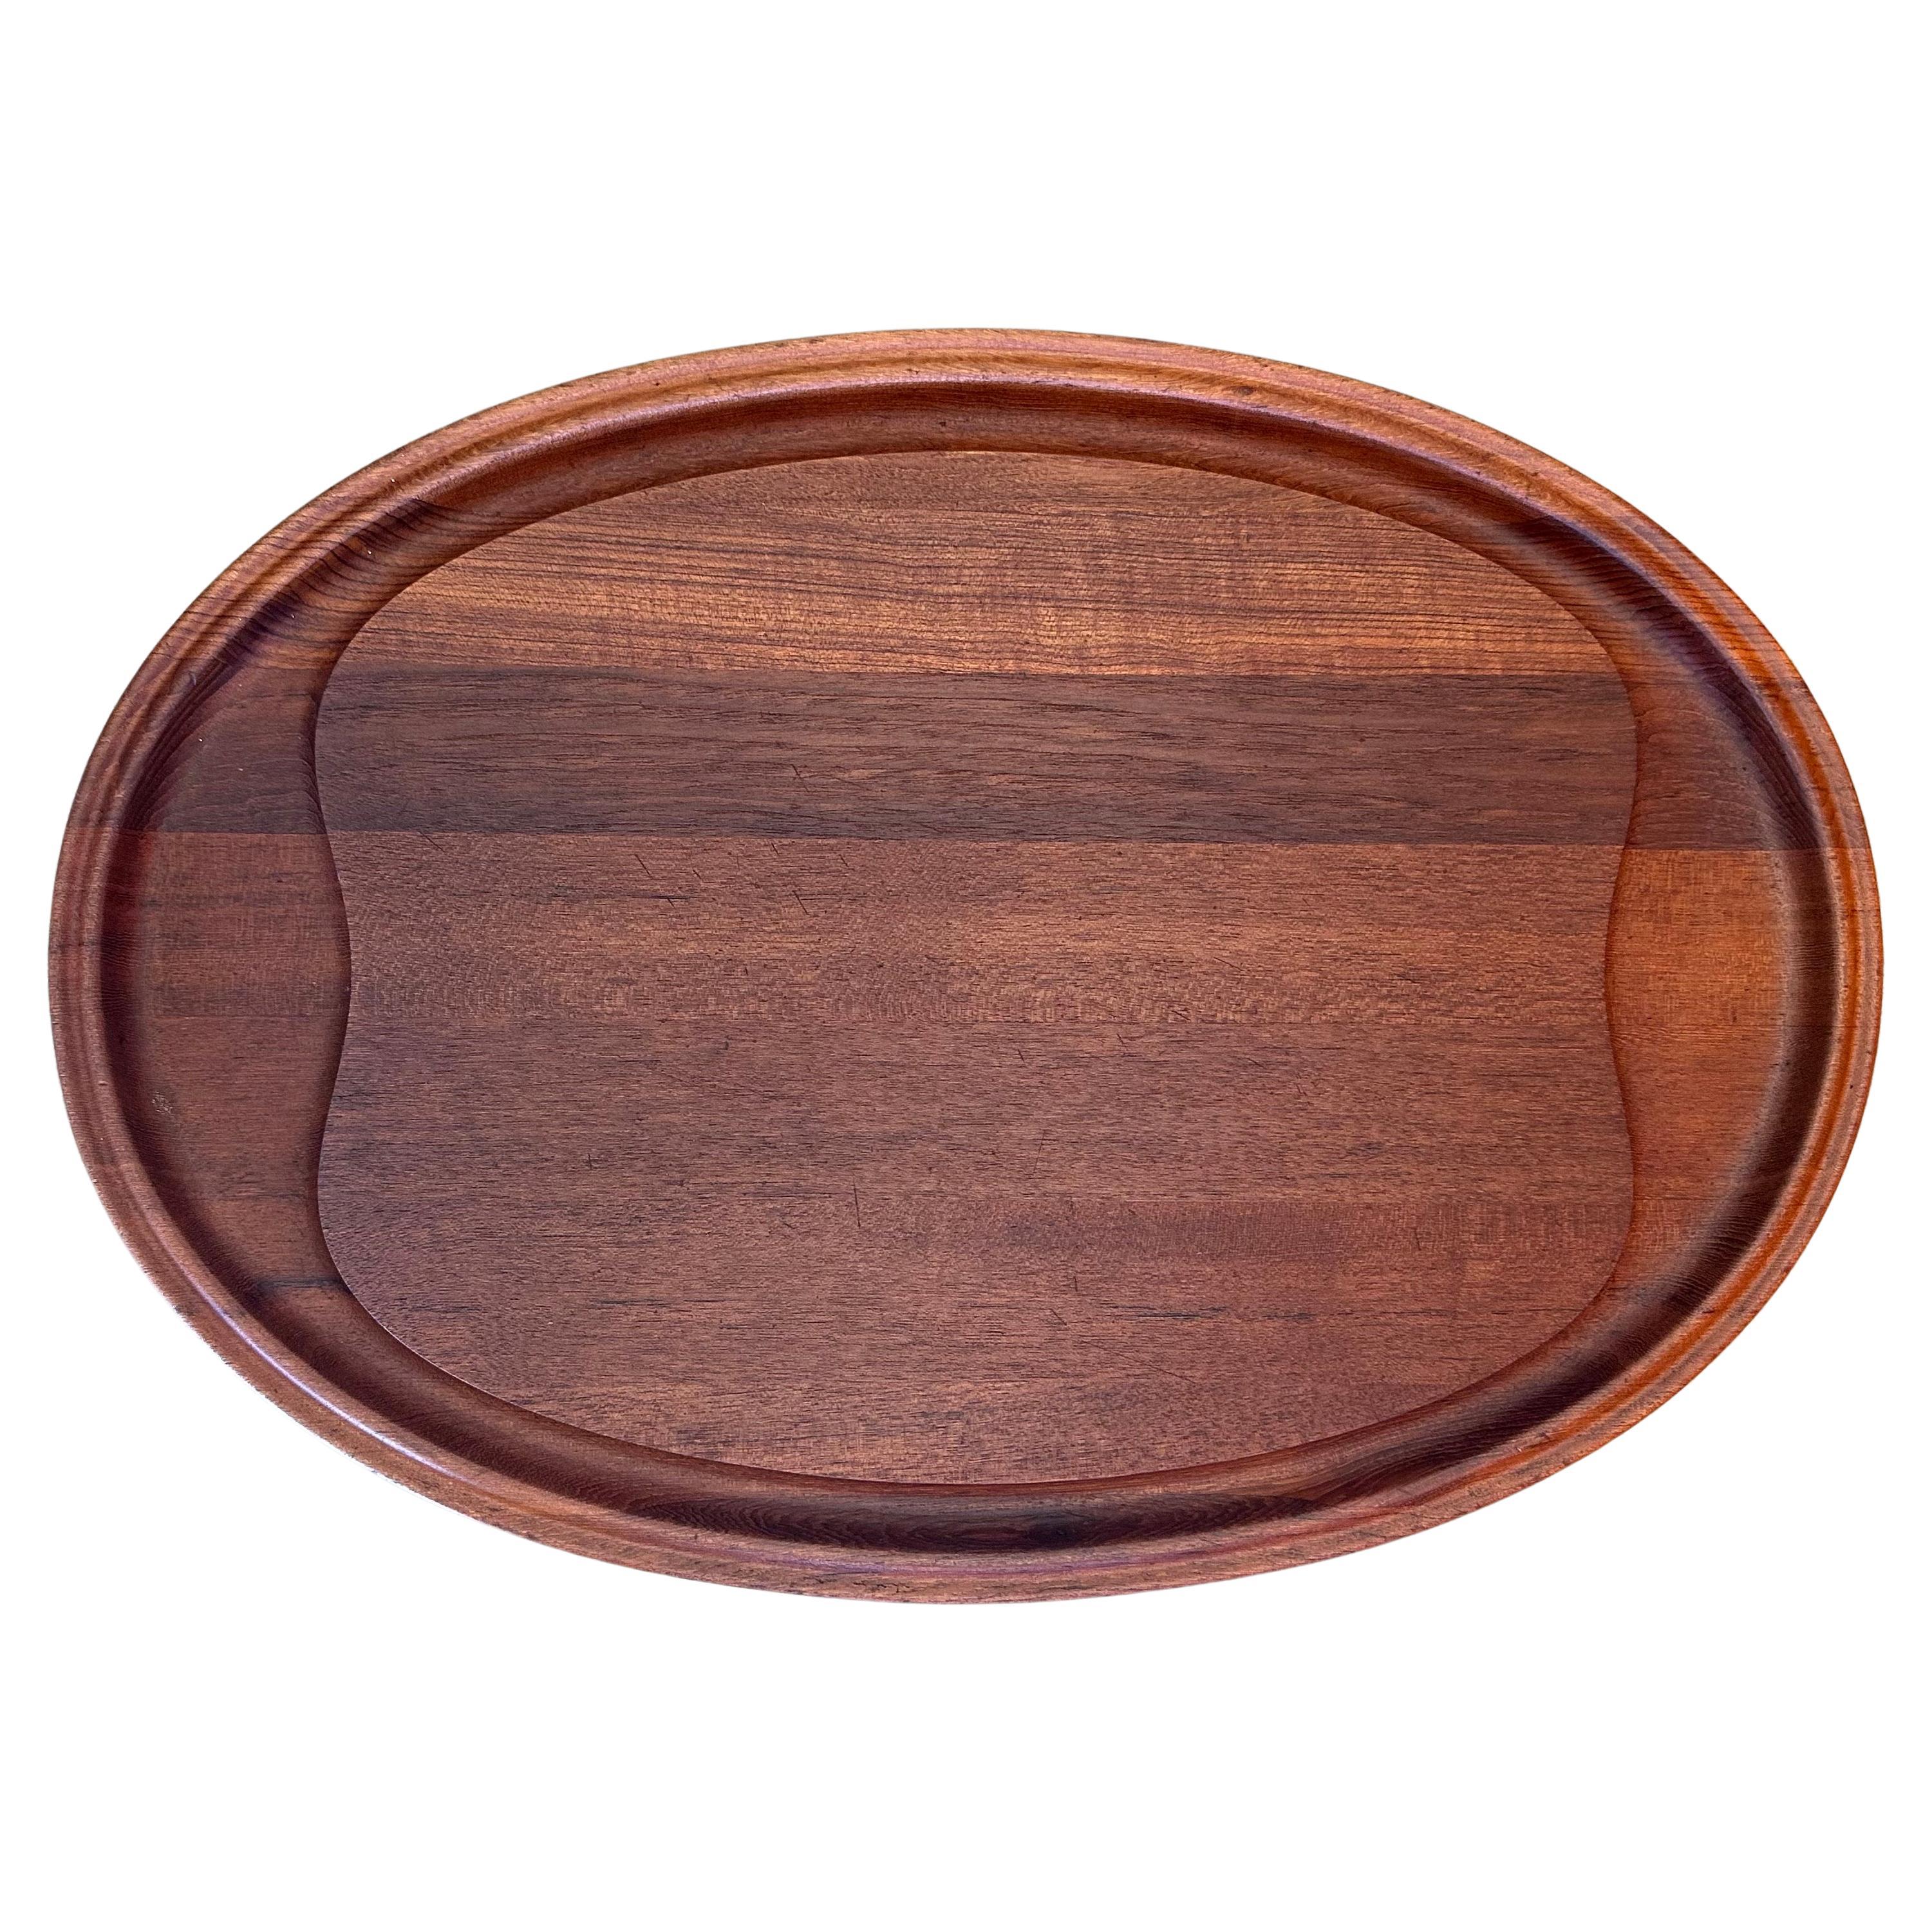 Beautiful Danish modern staved teak carving board by Henning Koppel for George Jensen, circa 1950s. The board is in excellent vintage condition and has been professionally refinished and oiled; it measures 23